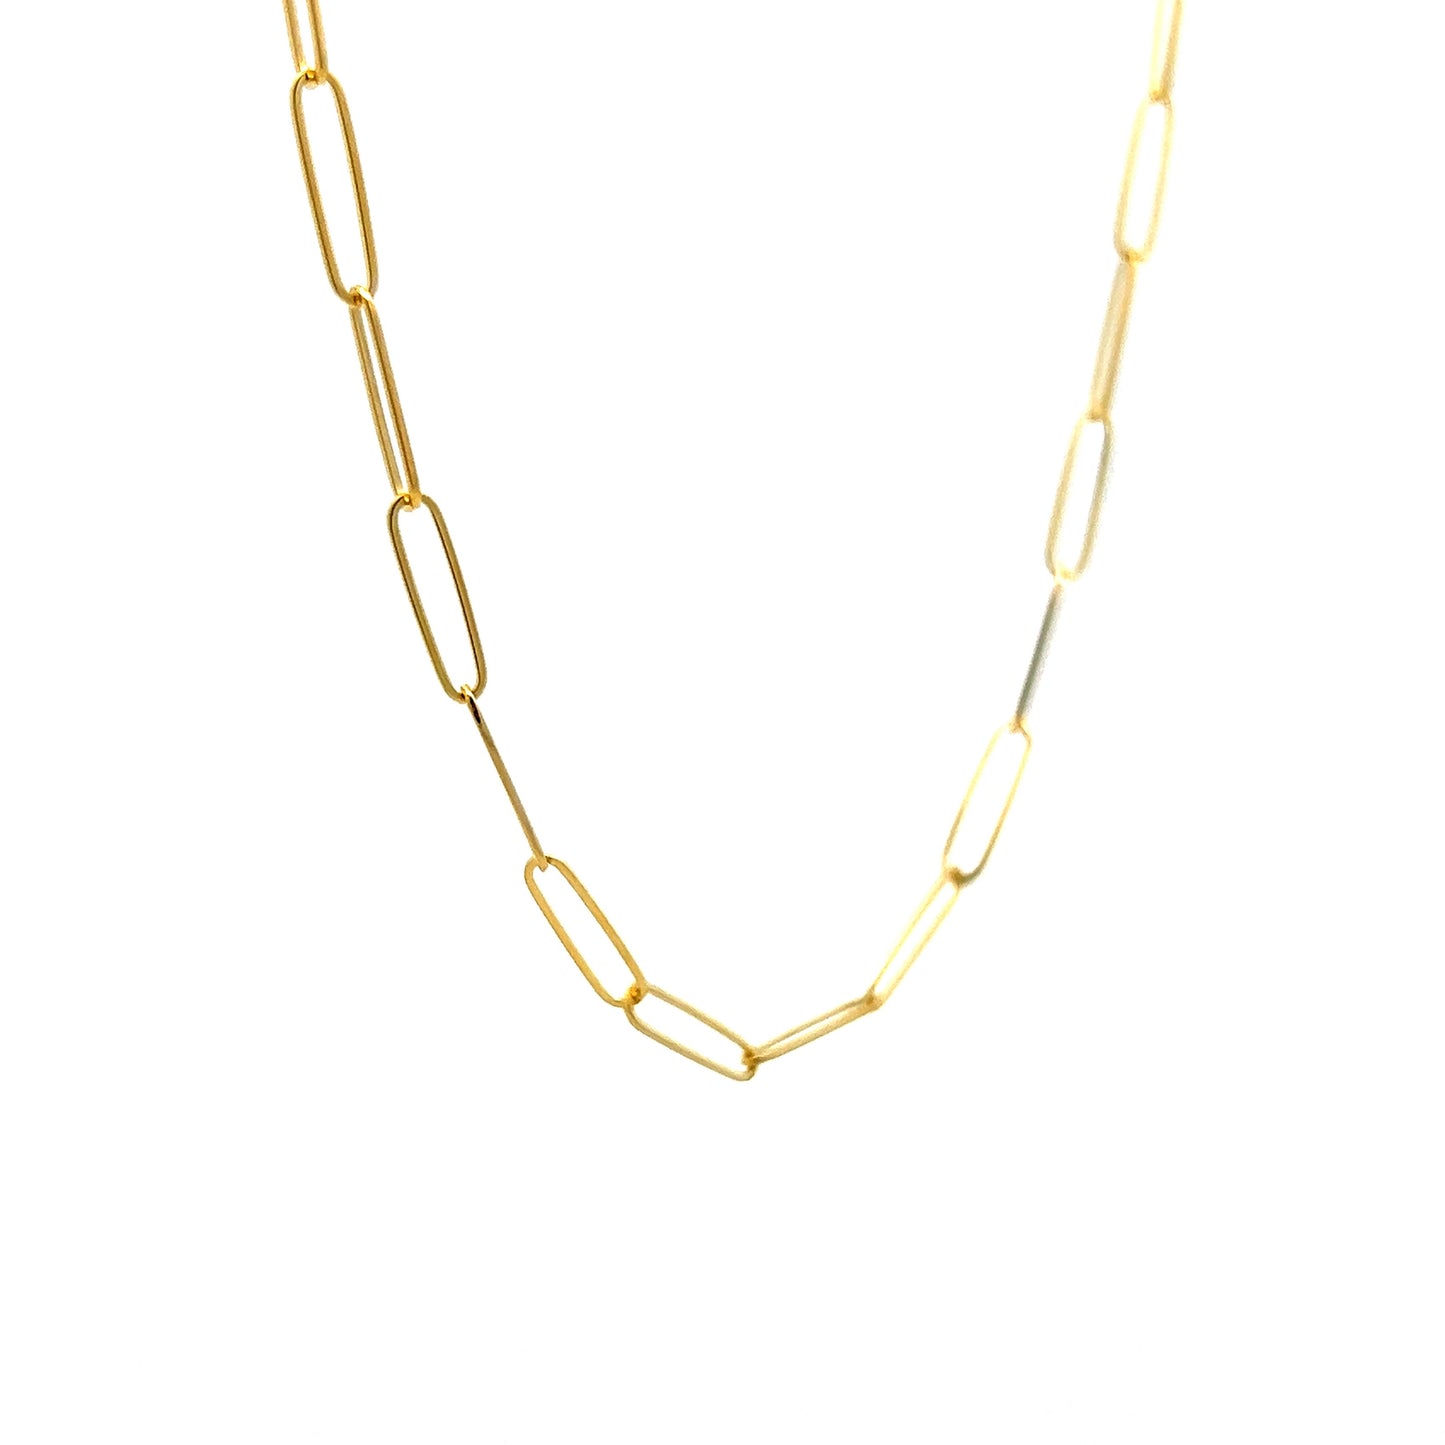 Extra Large Solid Paperclip Chain in 14K Yellow Gold - 18 inch - M. Flynn